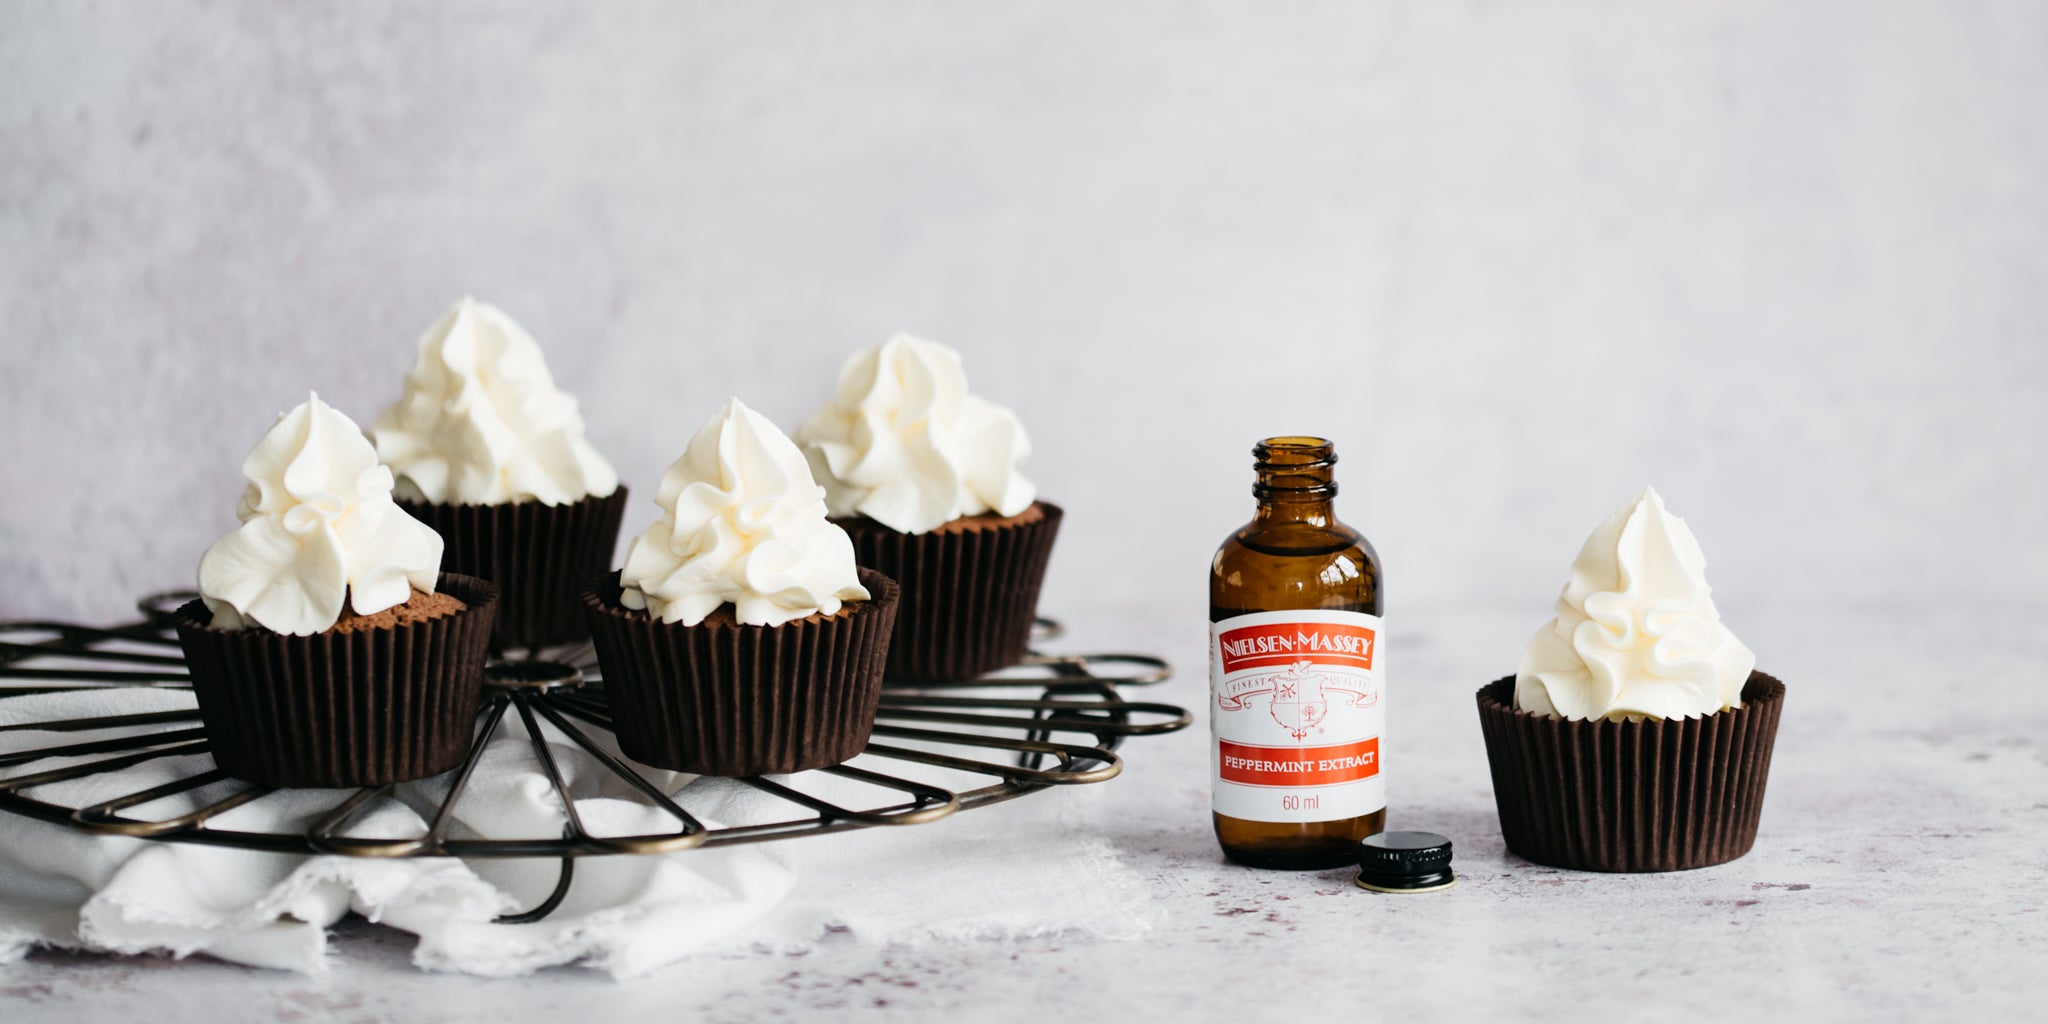 Chocolate & Peppermint Cupcakes on a wire rack, swirled with peppermint buttercream next to a bottle of Nielsen Massey Peppermint Extract